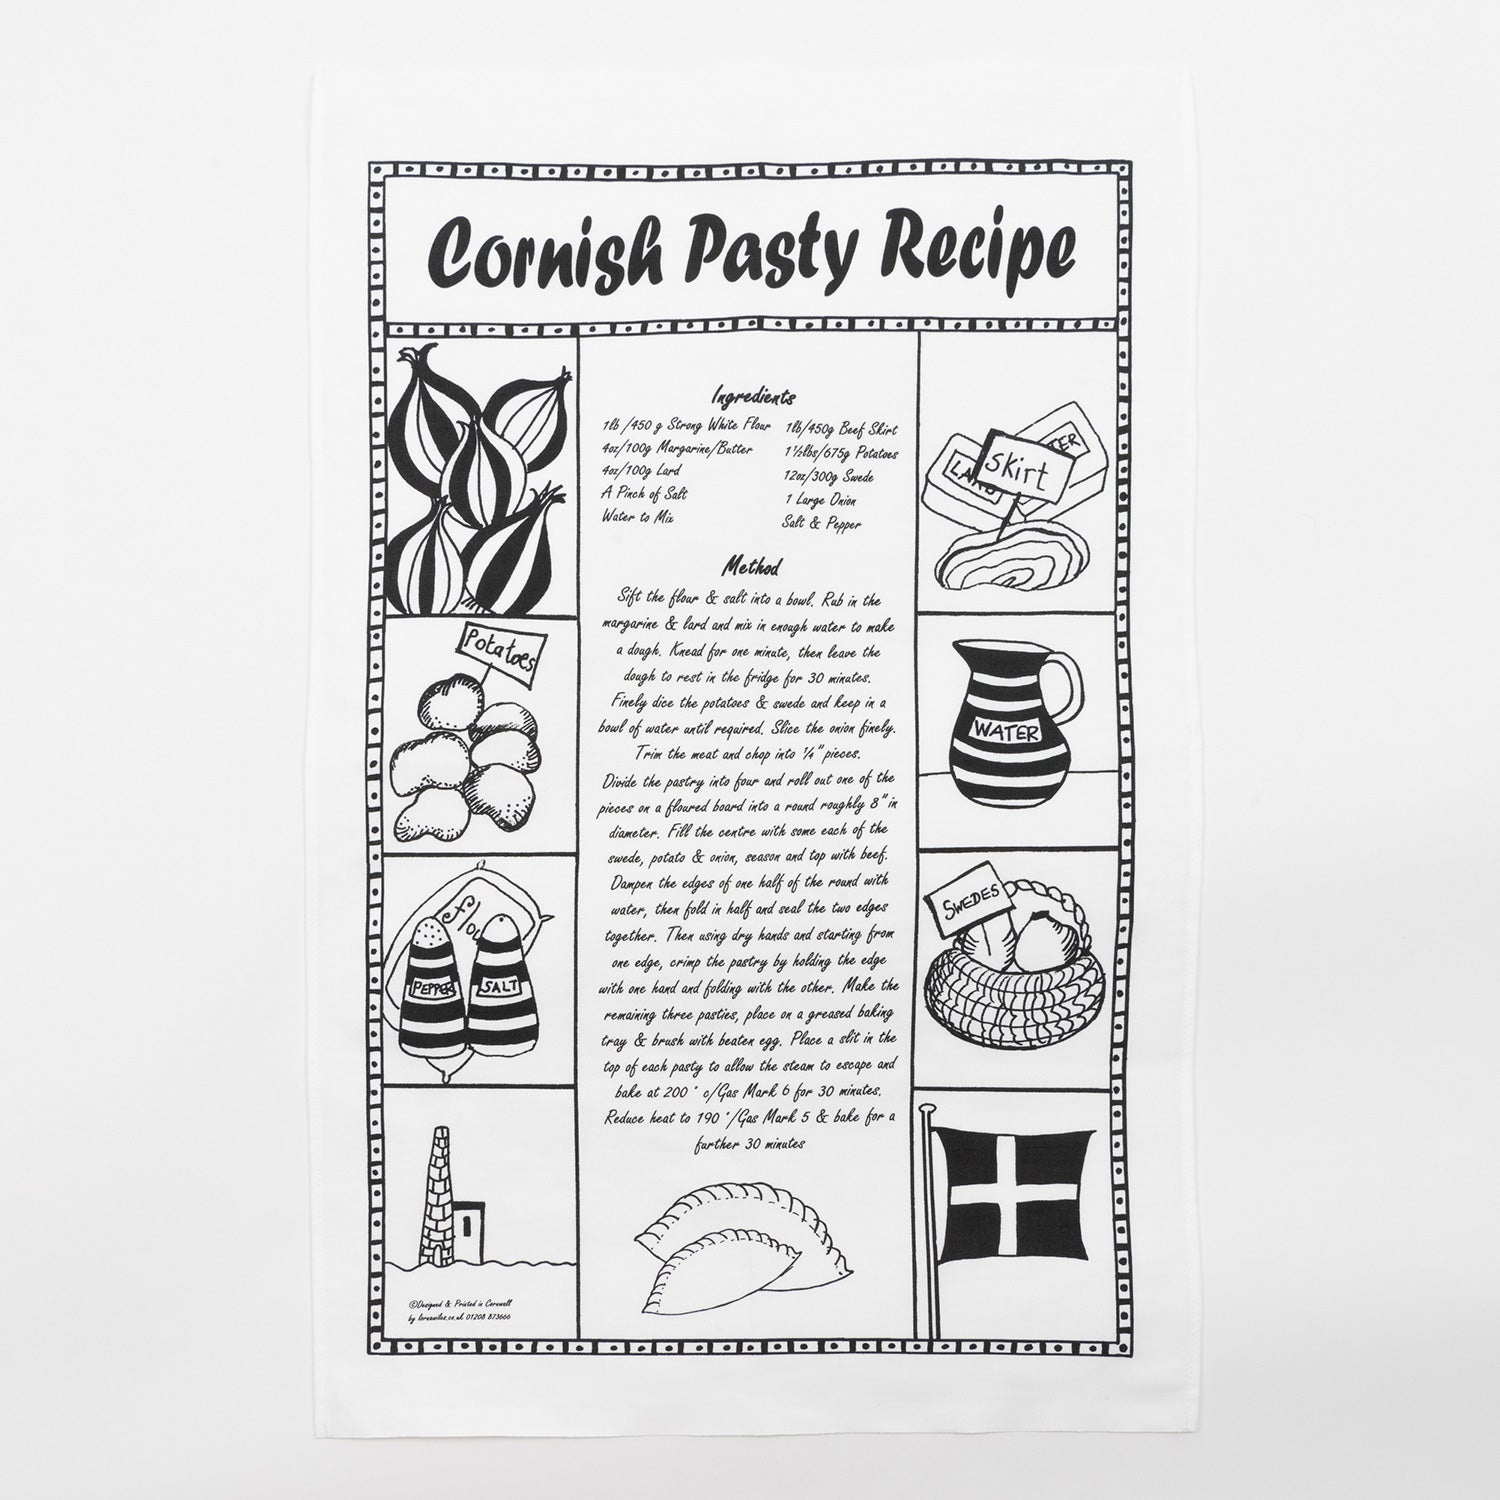 Black and white Cornish pasty recipe tea towel against a white background.